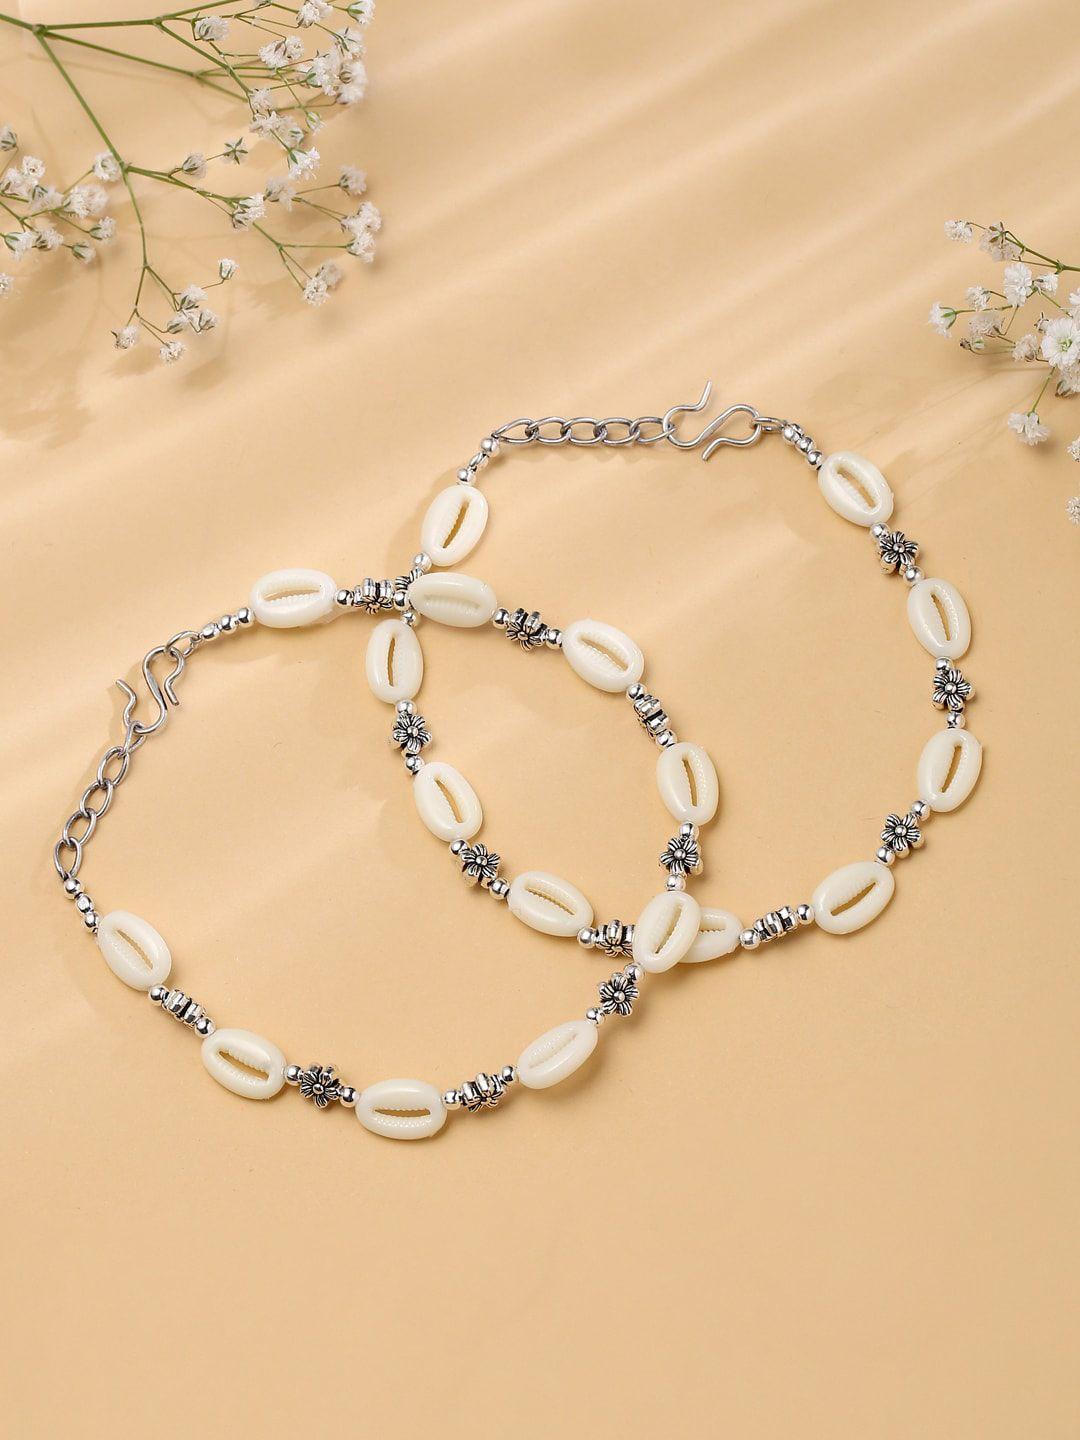 viraasi set of 2 white beaded anklets